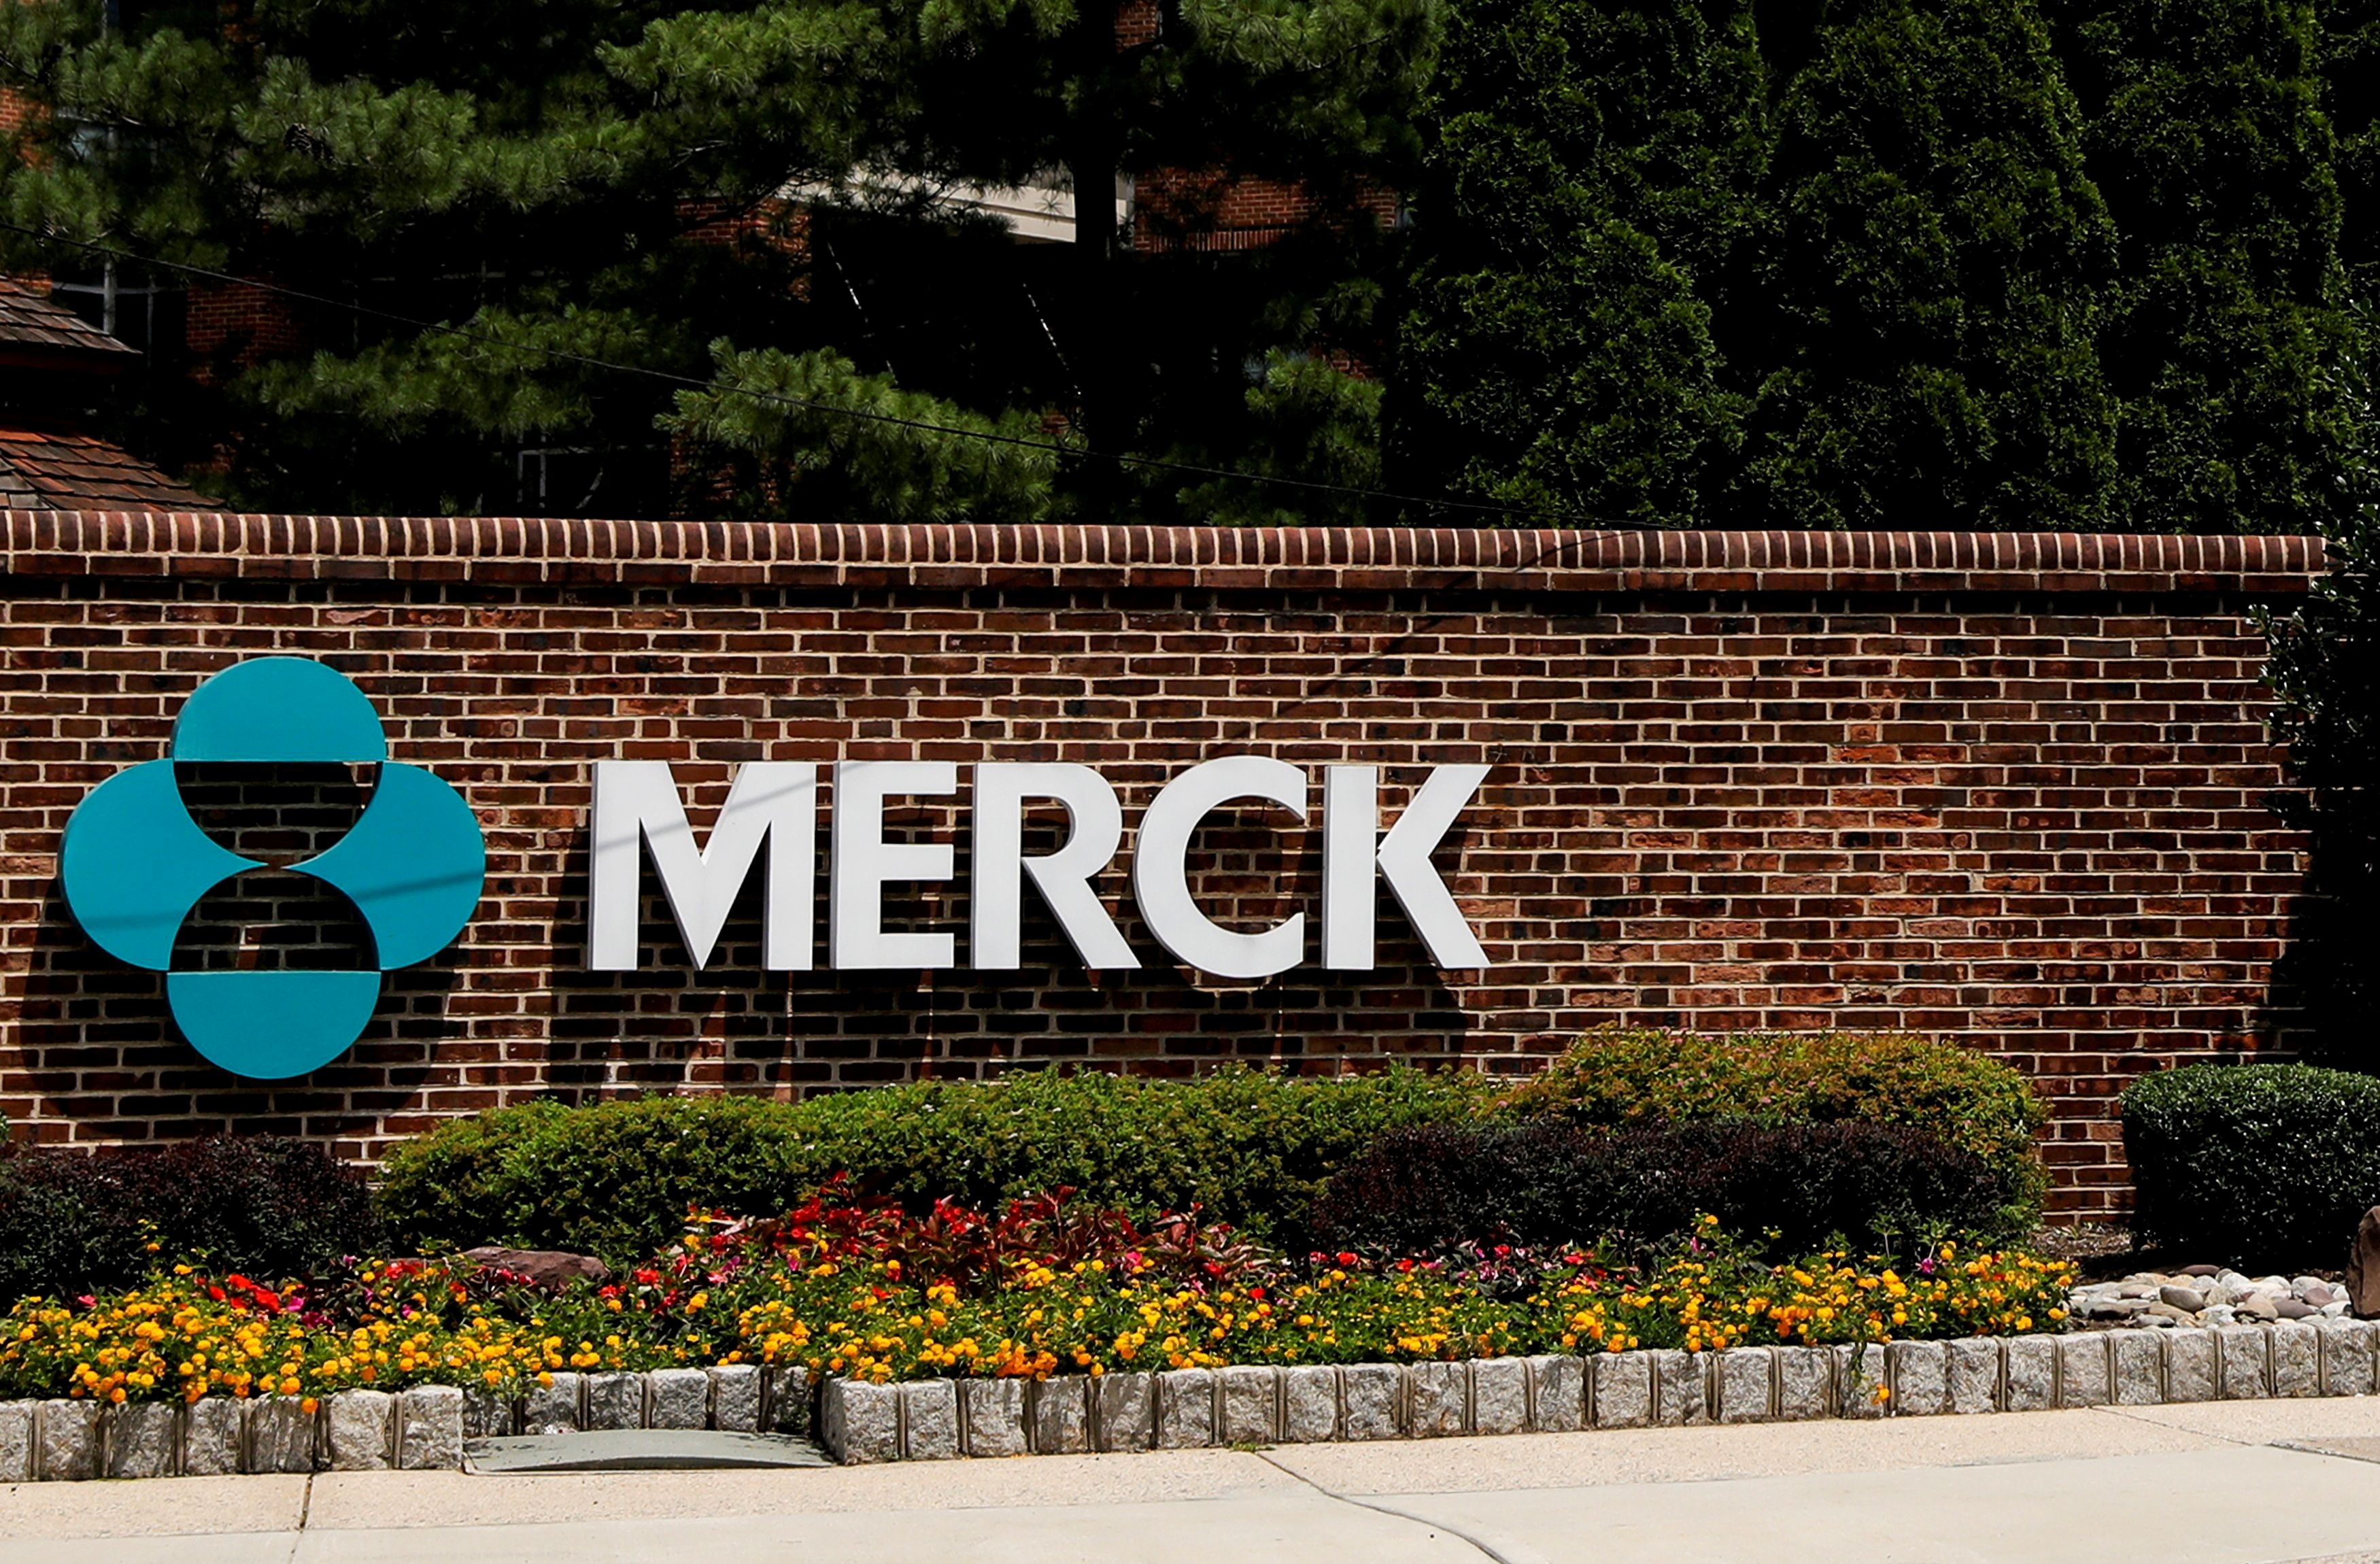 FILE PHOTO: FILE PHOTO: The Merck logo is seen at a gate to the Merck & Co campus in Rahway, New Jersey, U.S., July 12, 2018. REUTERS/Brendan McDermid/File Photo/File Photo/File Photo